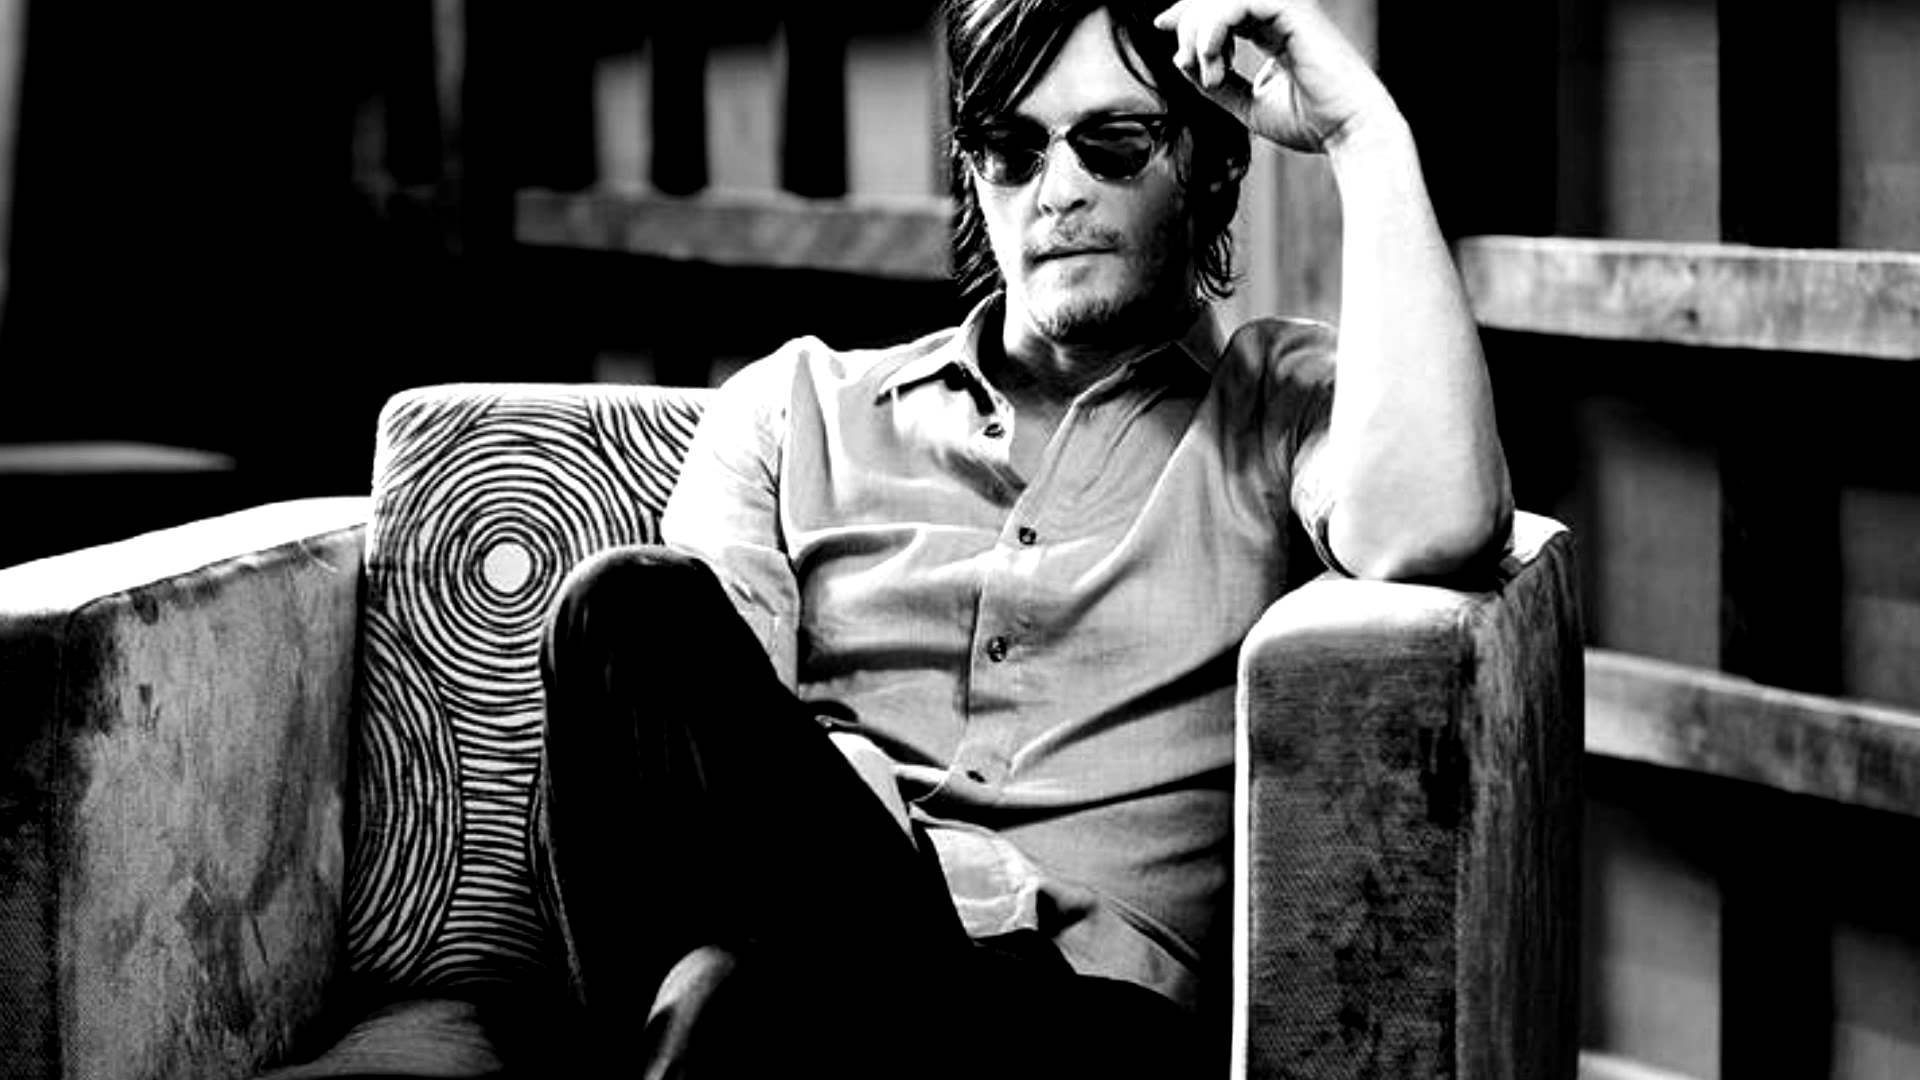 Norman Reedus Wallpaper High Resolution And Quality